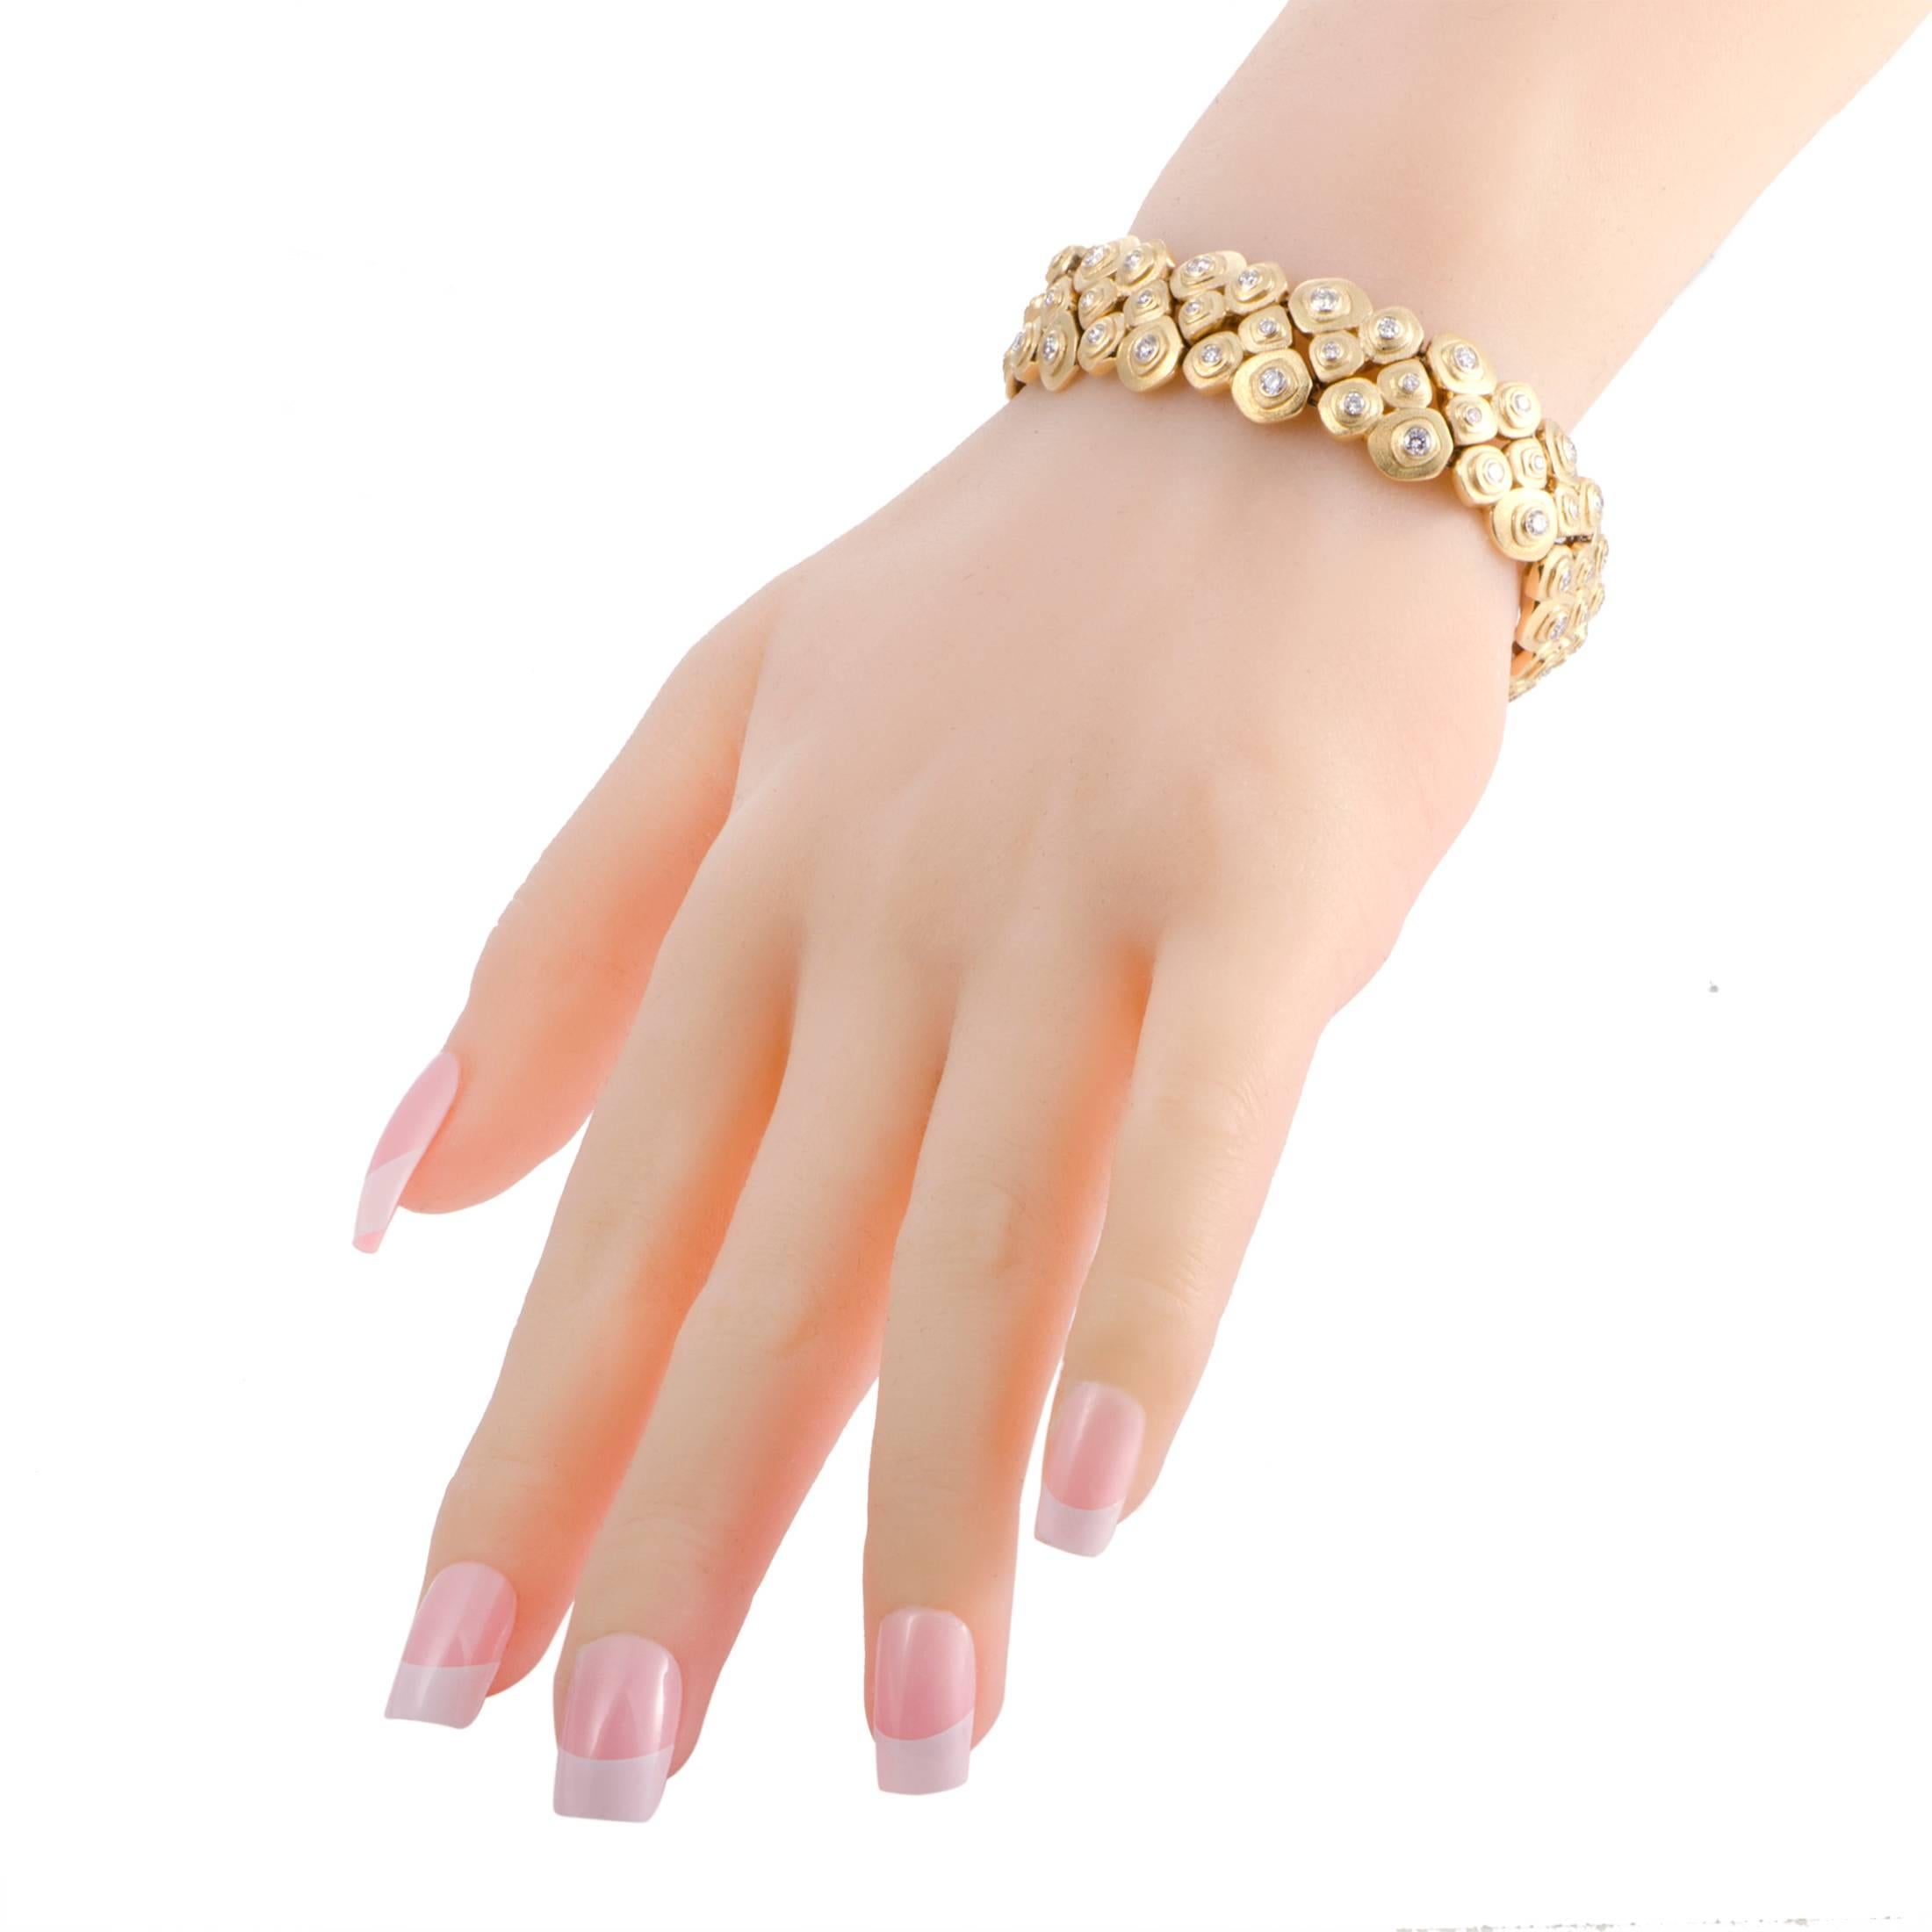 By combining delightful feminine design with luxurious materials, this “Pebble” bracelet from Alex Sepkus achieves a look of utmost elegance and prestige. The bracelet is made of quintessential 18K yellow gold and boasts diamond décor in the form of